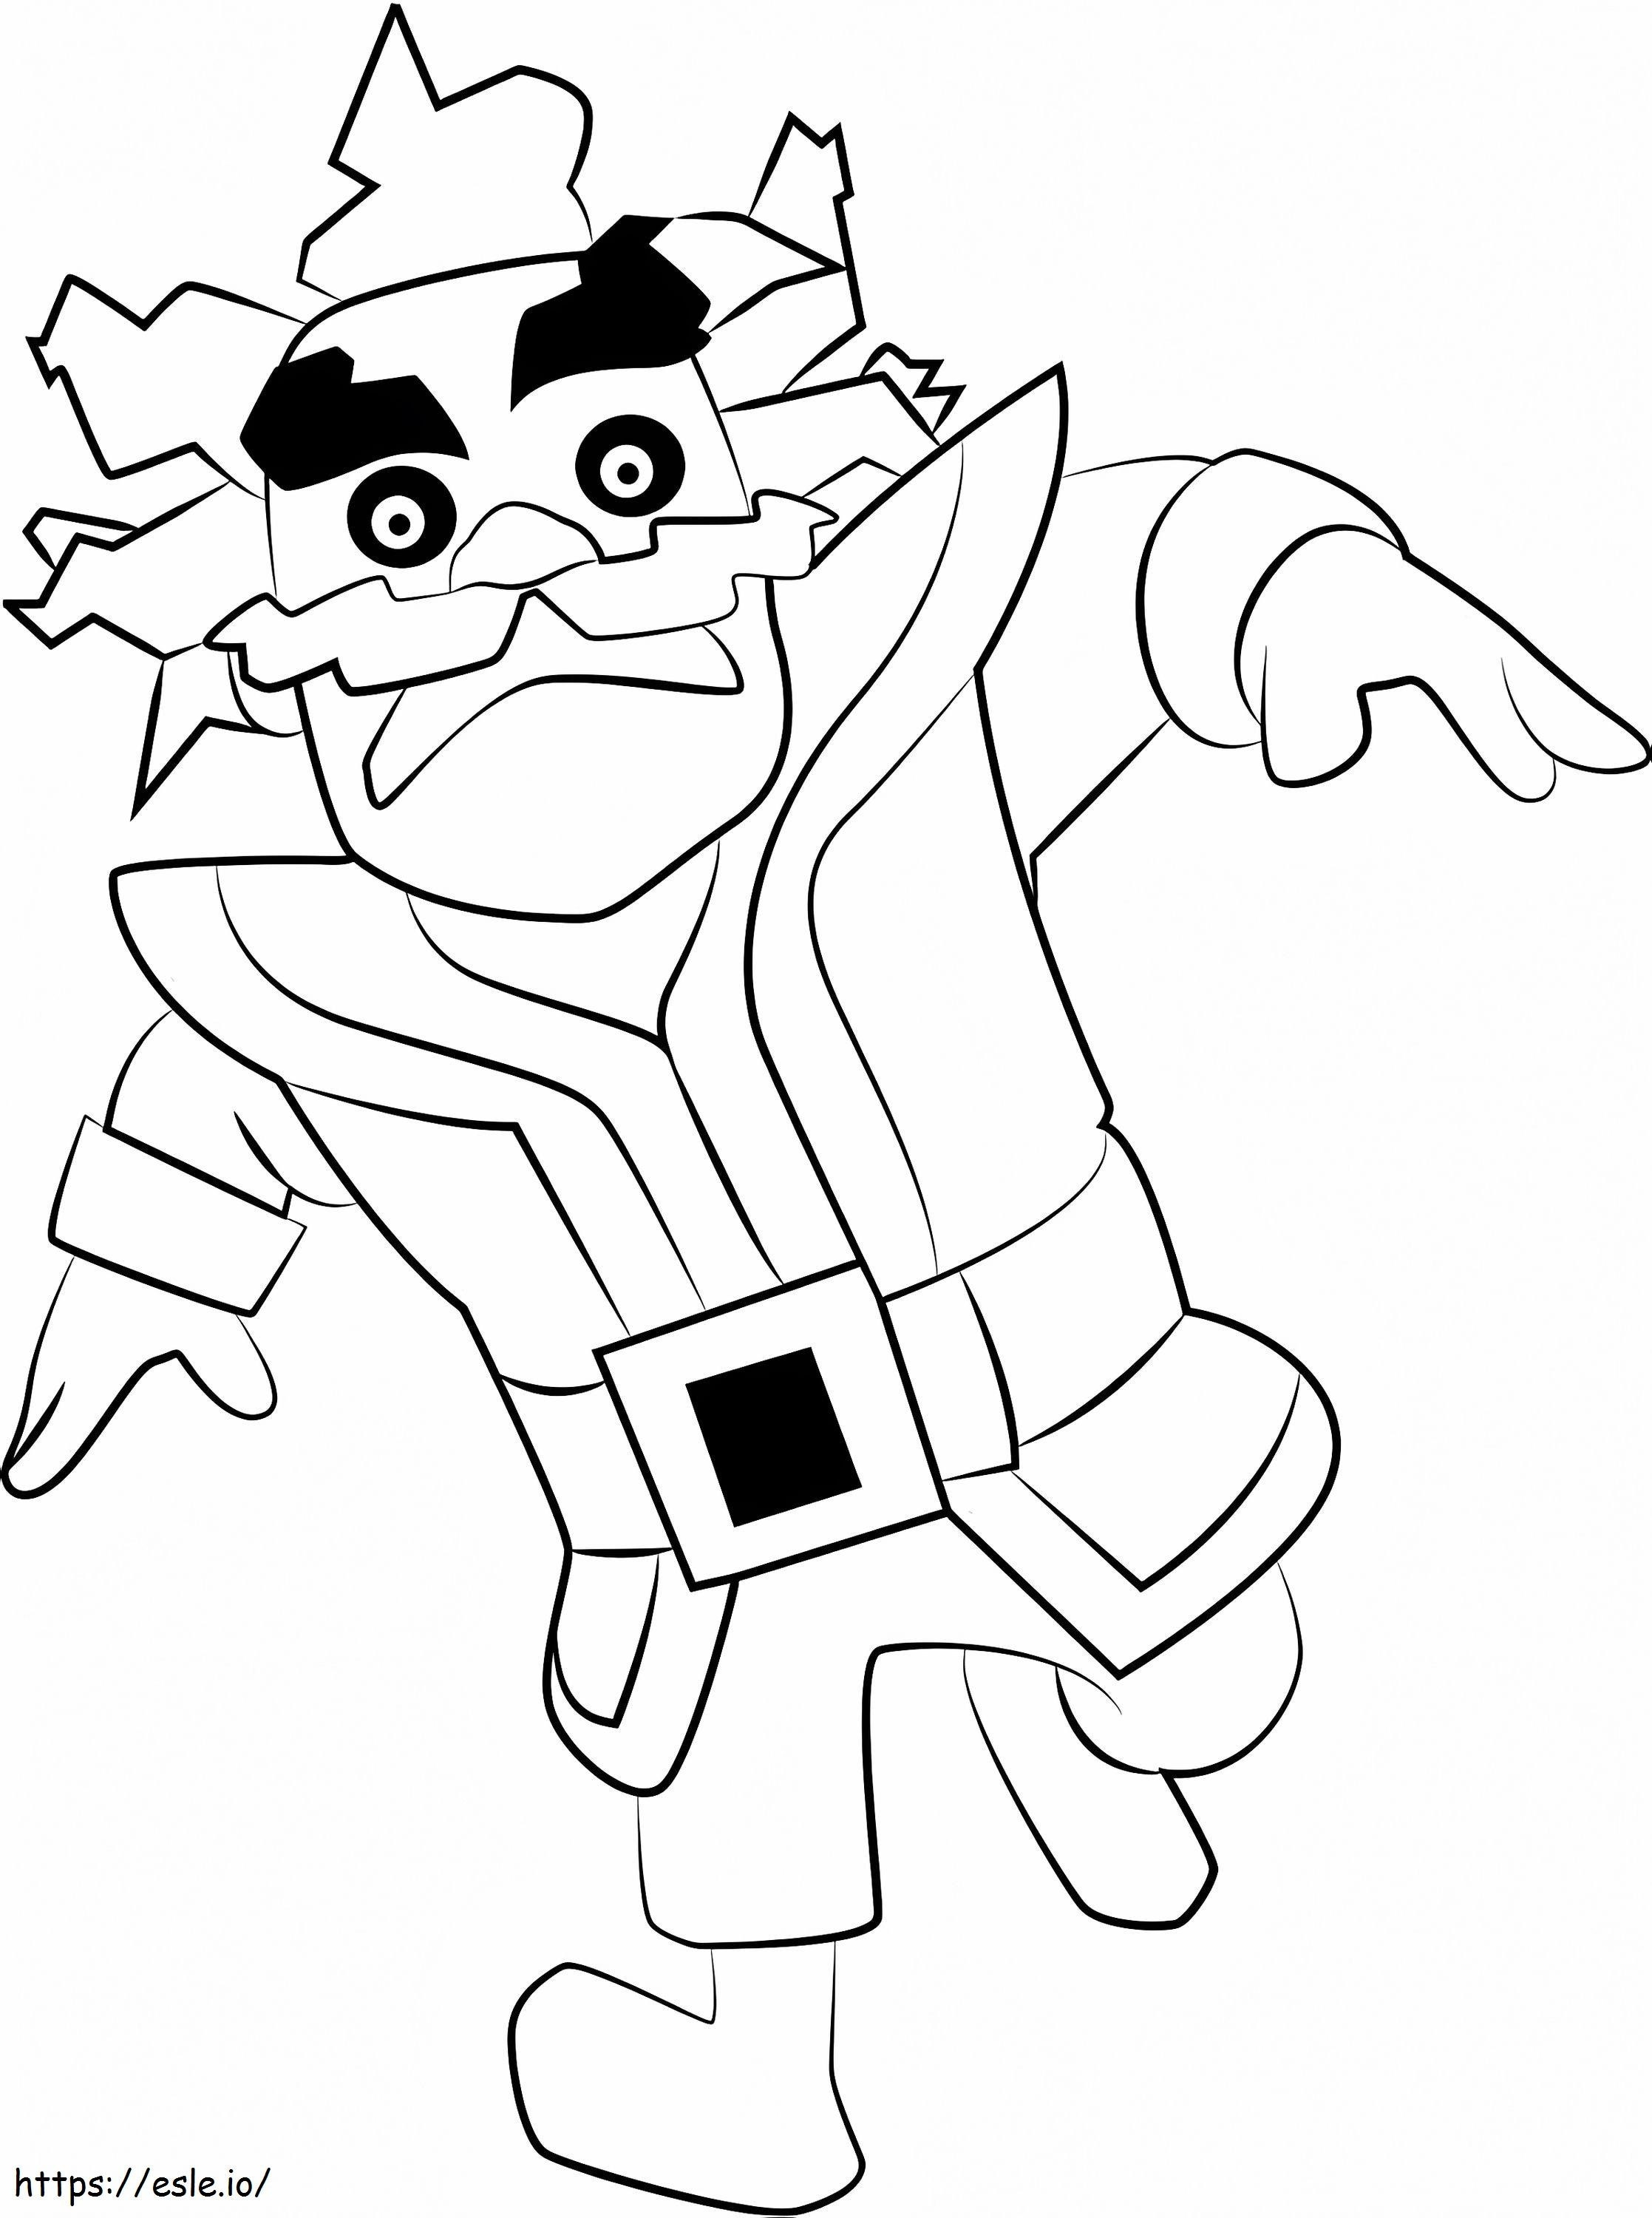 Electro Magician coloring page